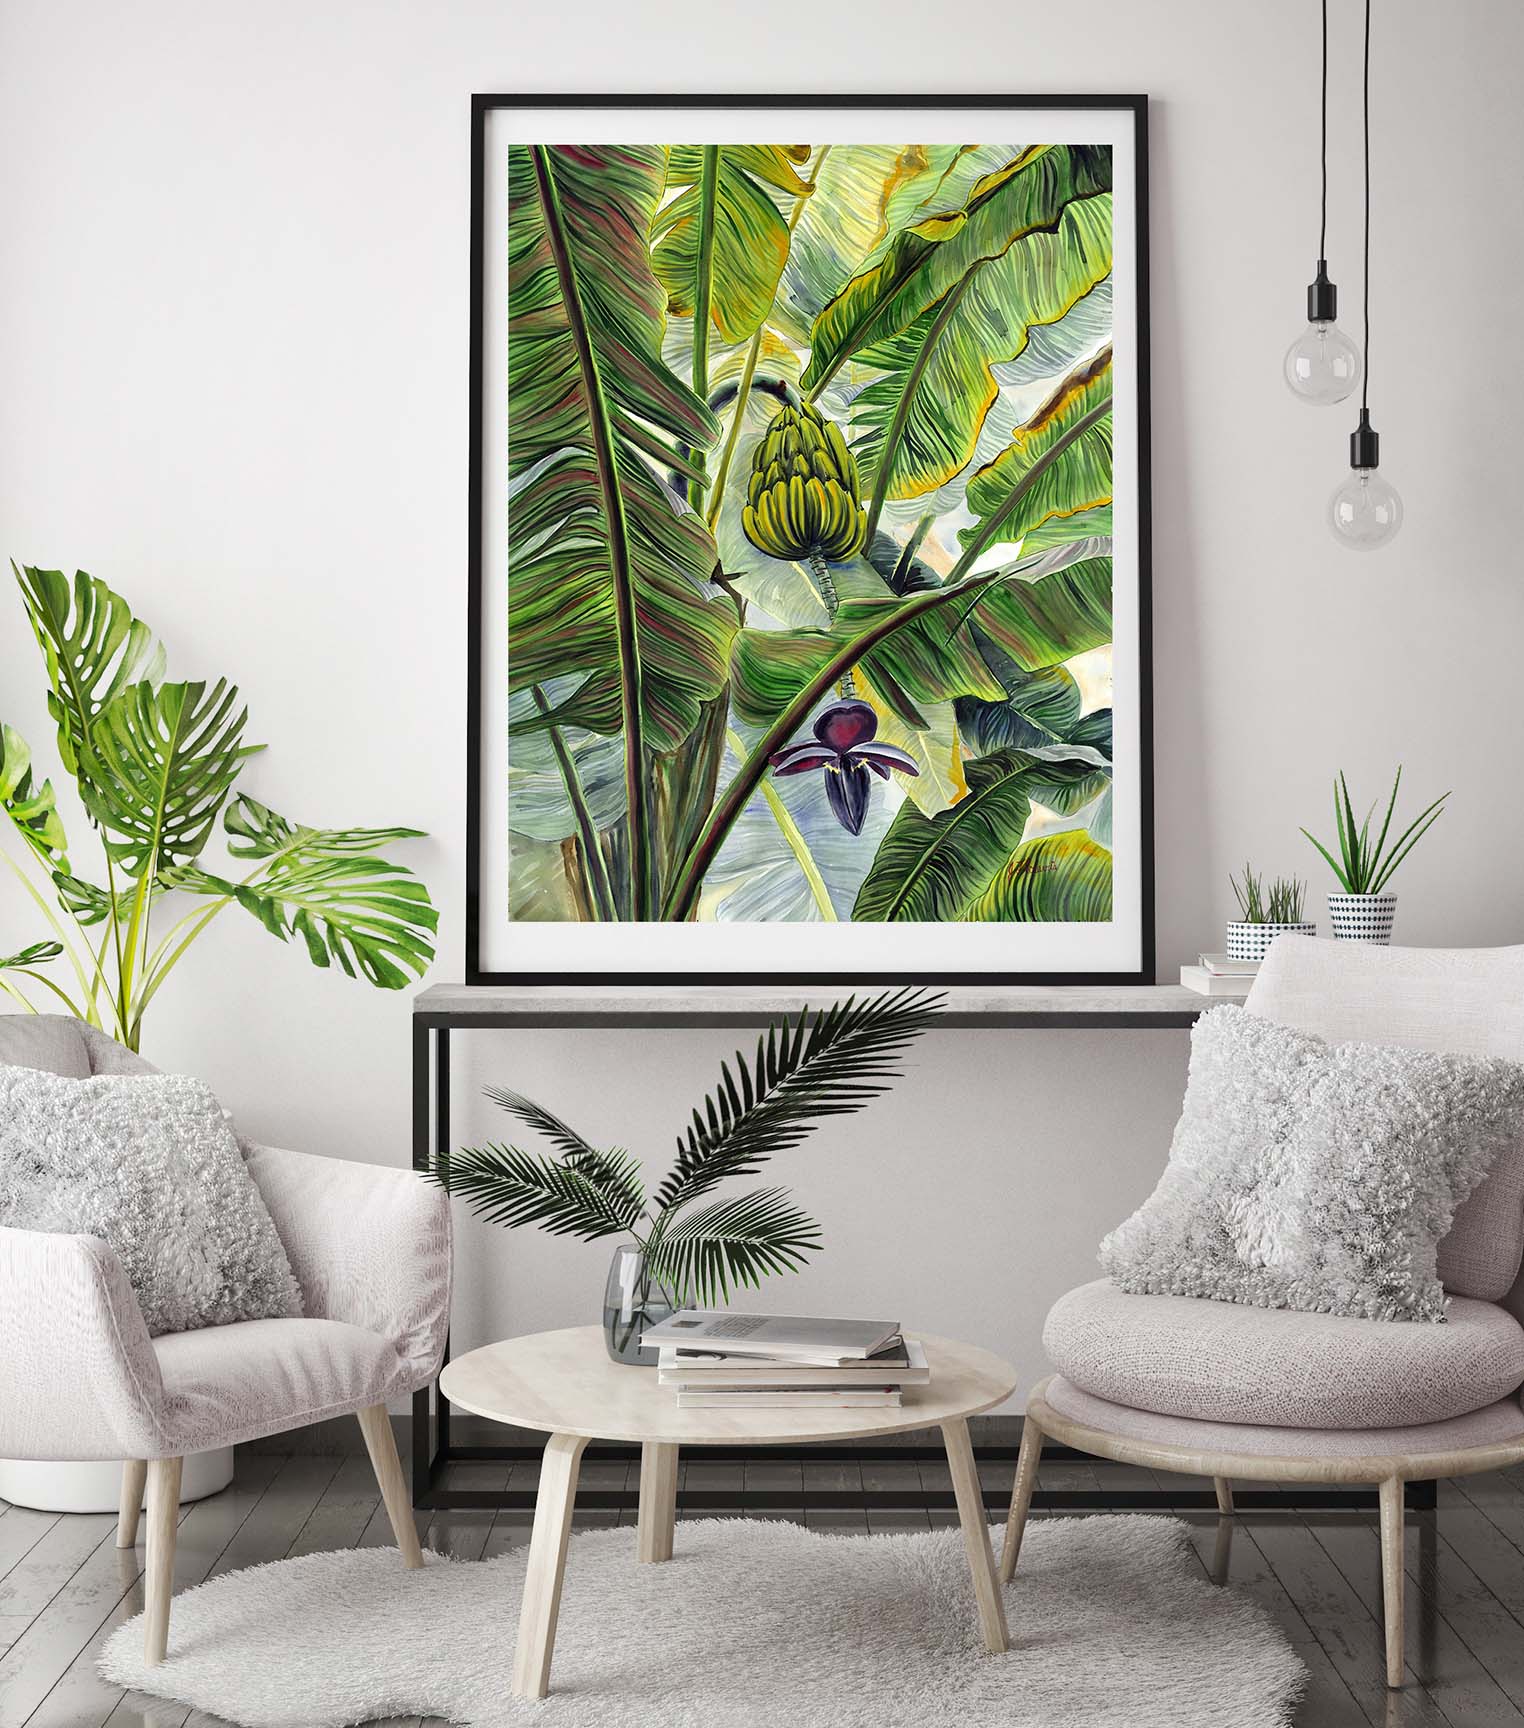 Purchase Jungle Banana watercolor painting by artist Jenny Floravita